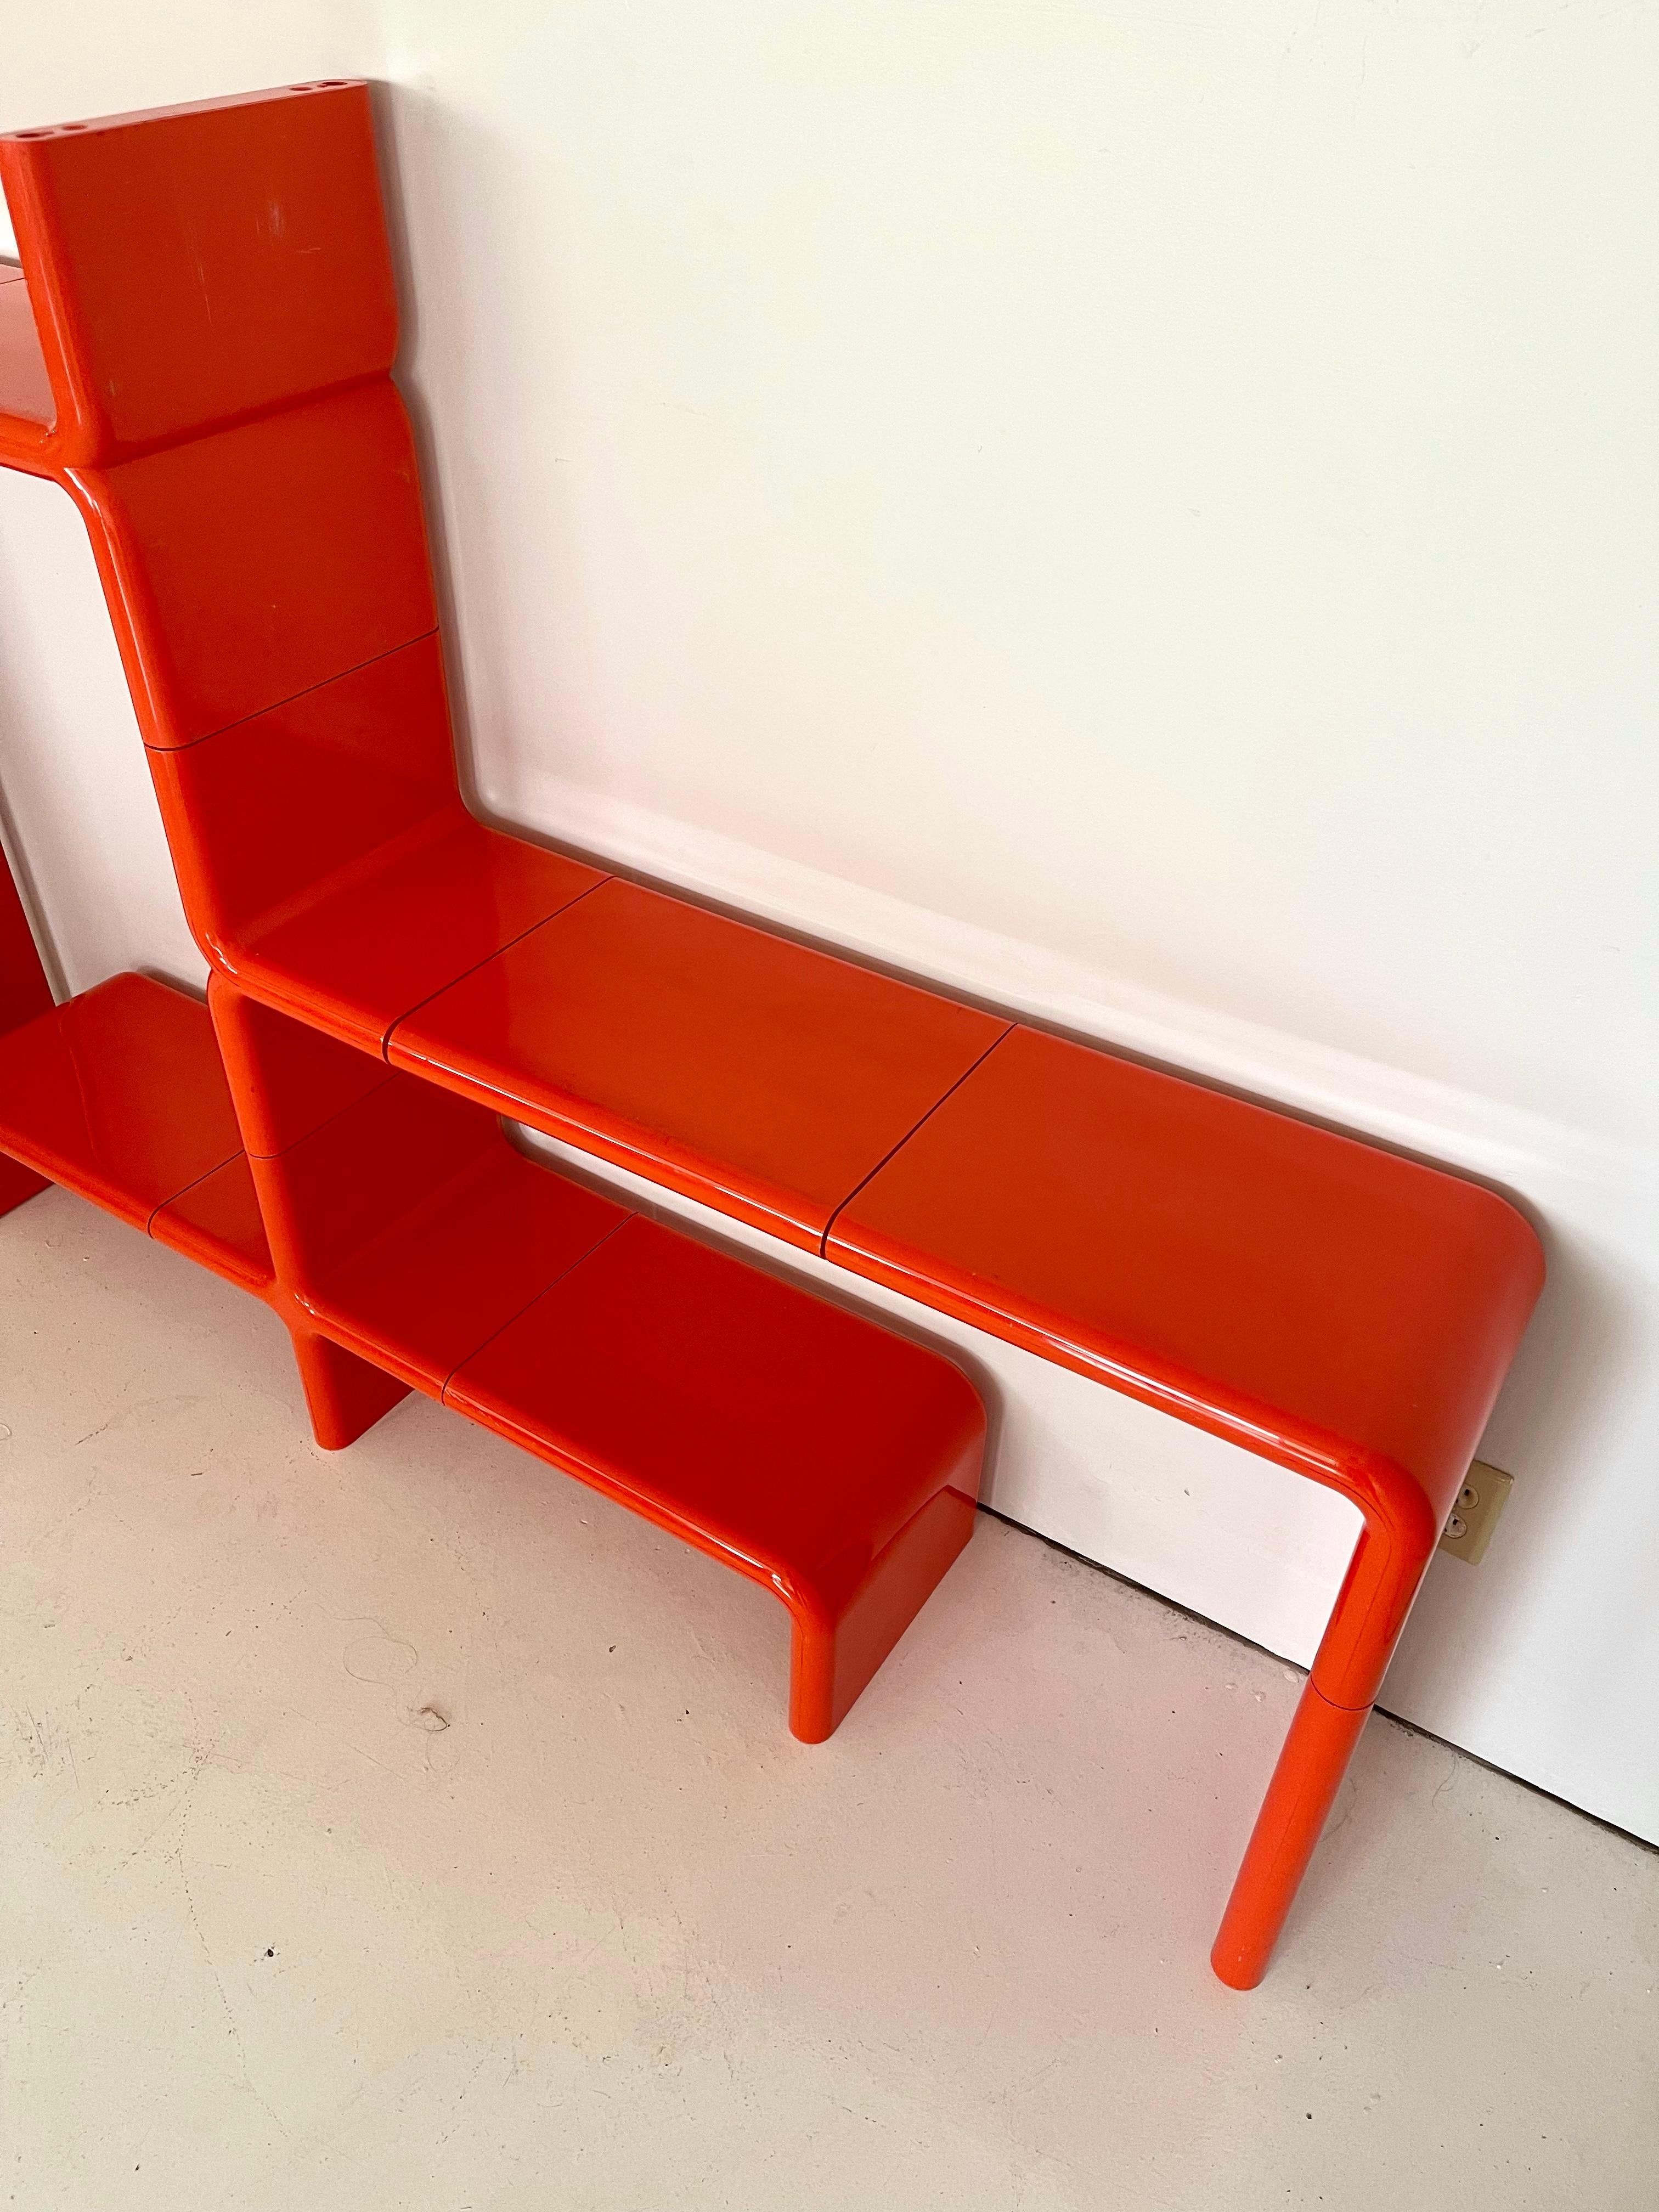 Iconic Umbo modular shelving designed by Kay Leroy Ruggles for Directional, USA 1970s. Strong molded abs plastic in multiple shapes to facilitate endless modularity. Connected using Leroy’s custom designed pegs. Includes 1 additional 16” long flat